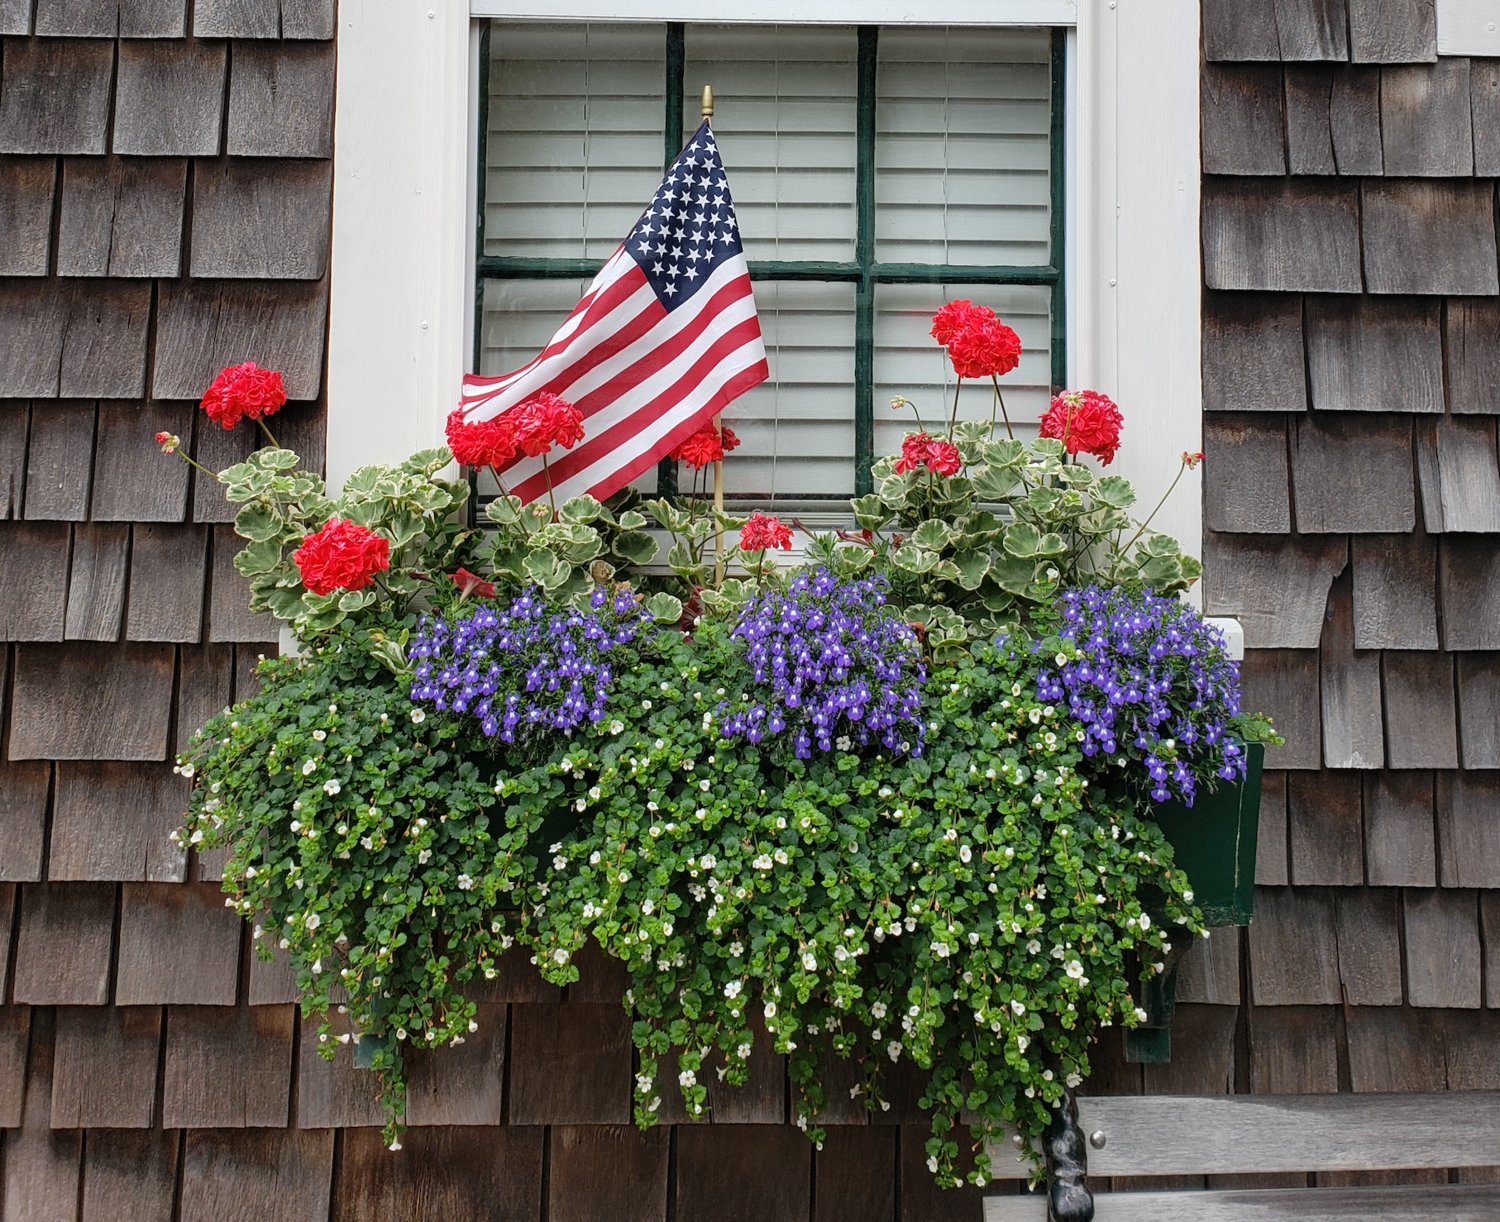 A patriotic flower box outside Visitor Services on Federal Street.